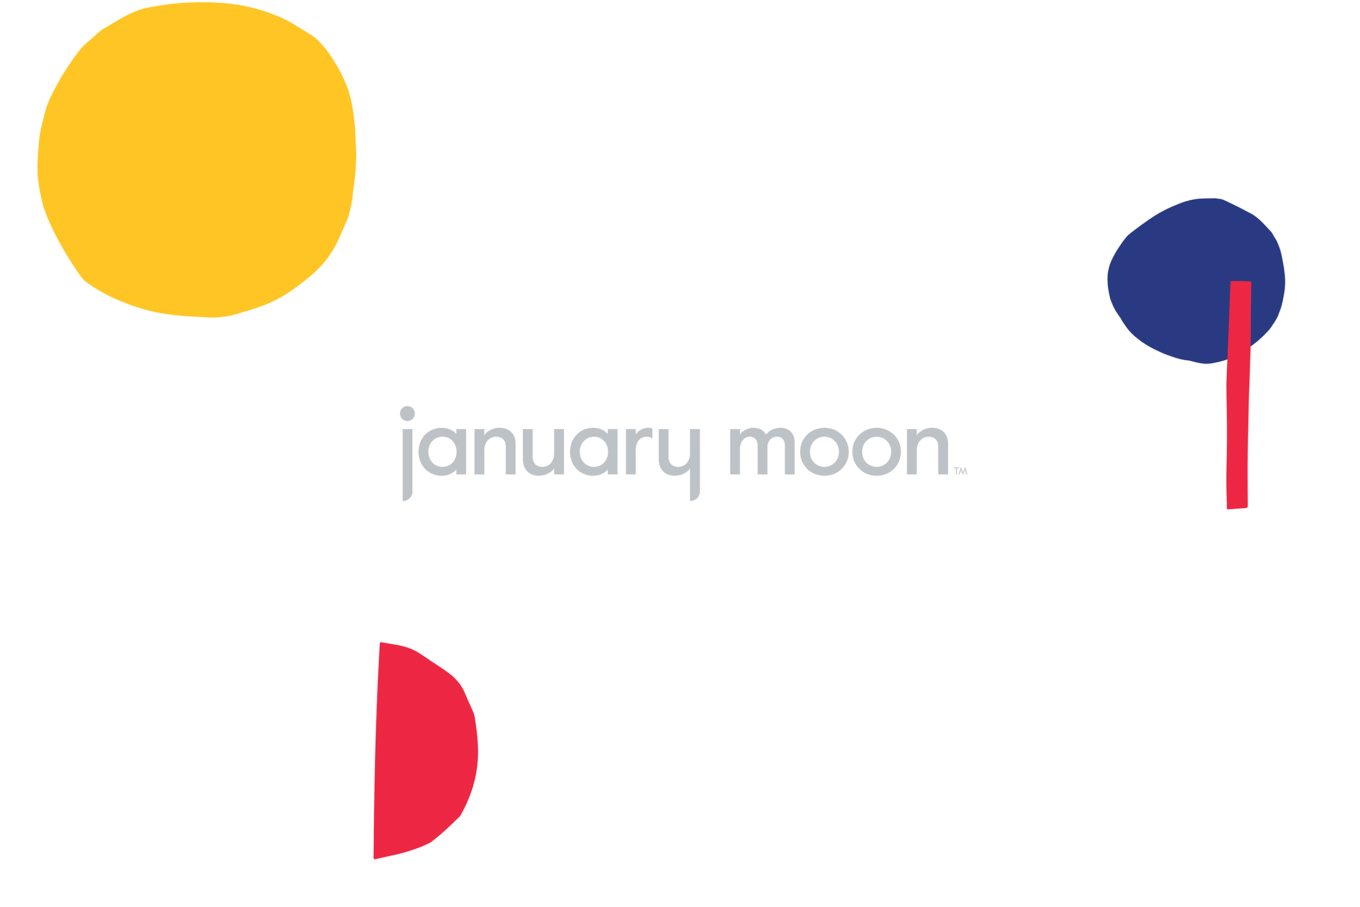 Logotype for teething jewellery brand January Moon by Perky Bros